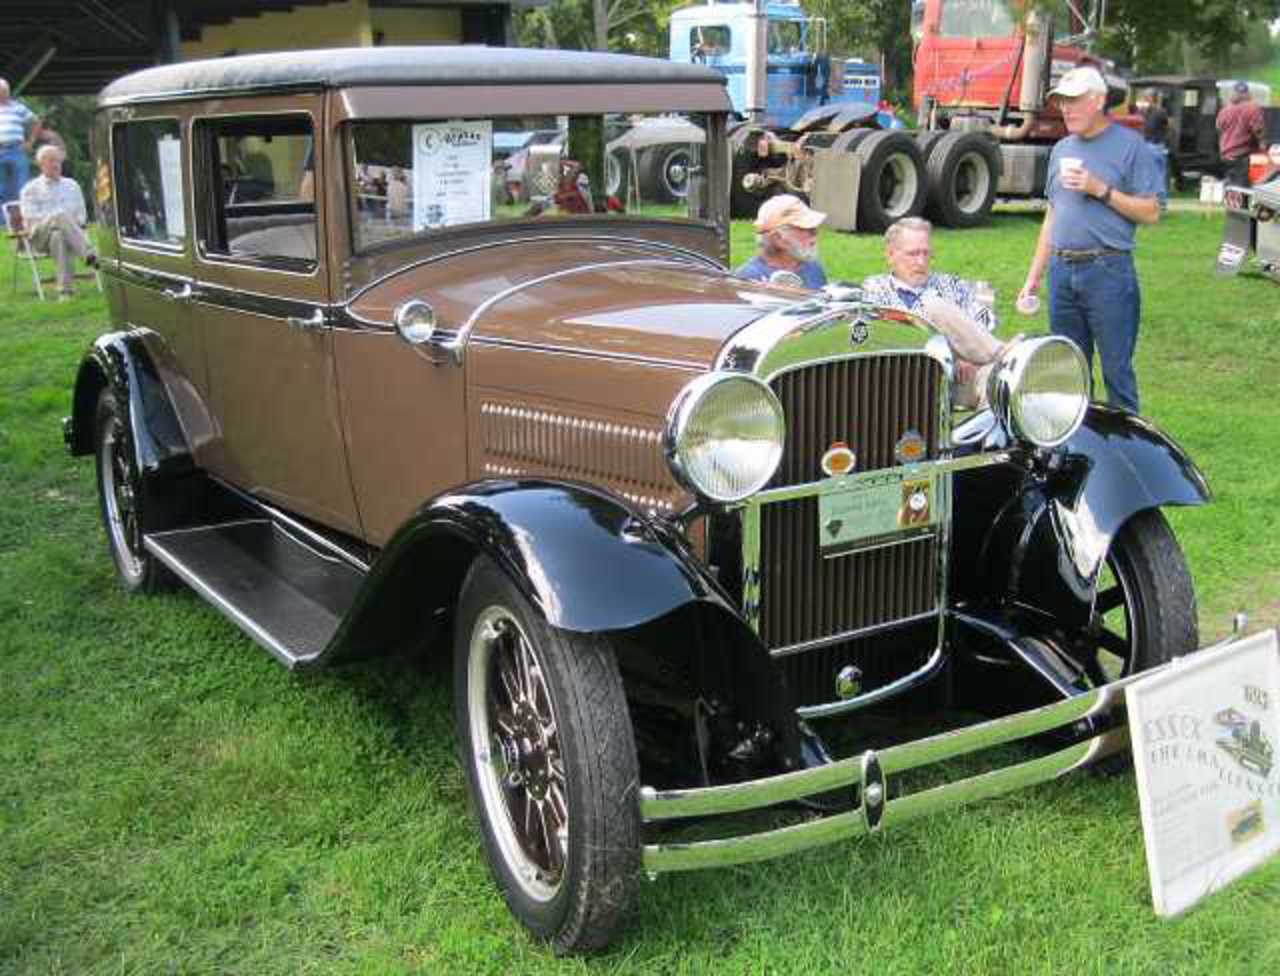 Essex Standard Sedan Photo Gallery: Photo #03 out of 9, Image Size ...